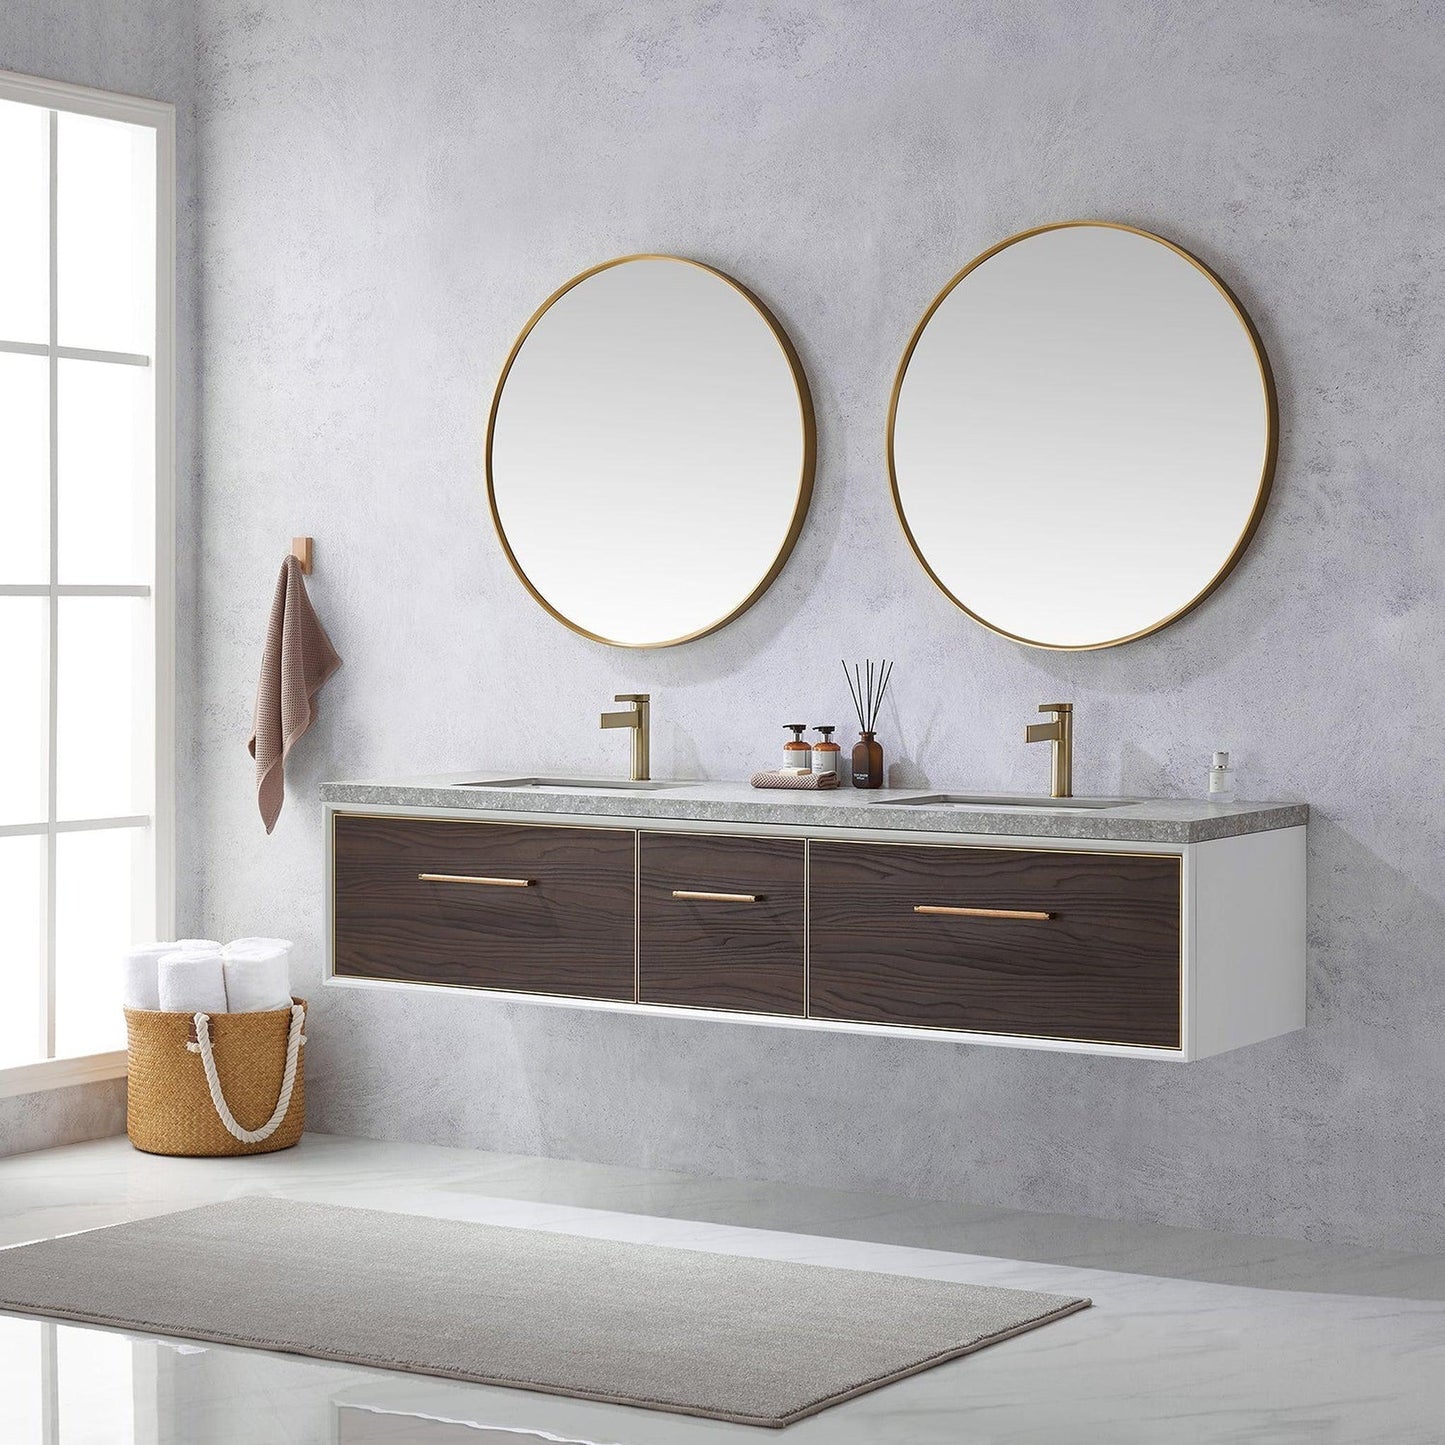 Vinnova Caparroso 84" Double Sink Floating Bathroom Vanity In Dark Walnut And Brushed Gold Hardware Finish With Grey Sintered Stone Top And Mirror